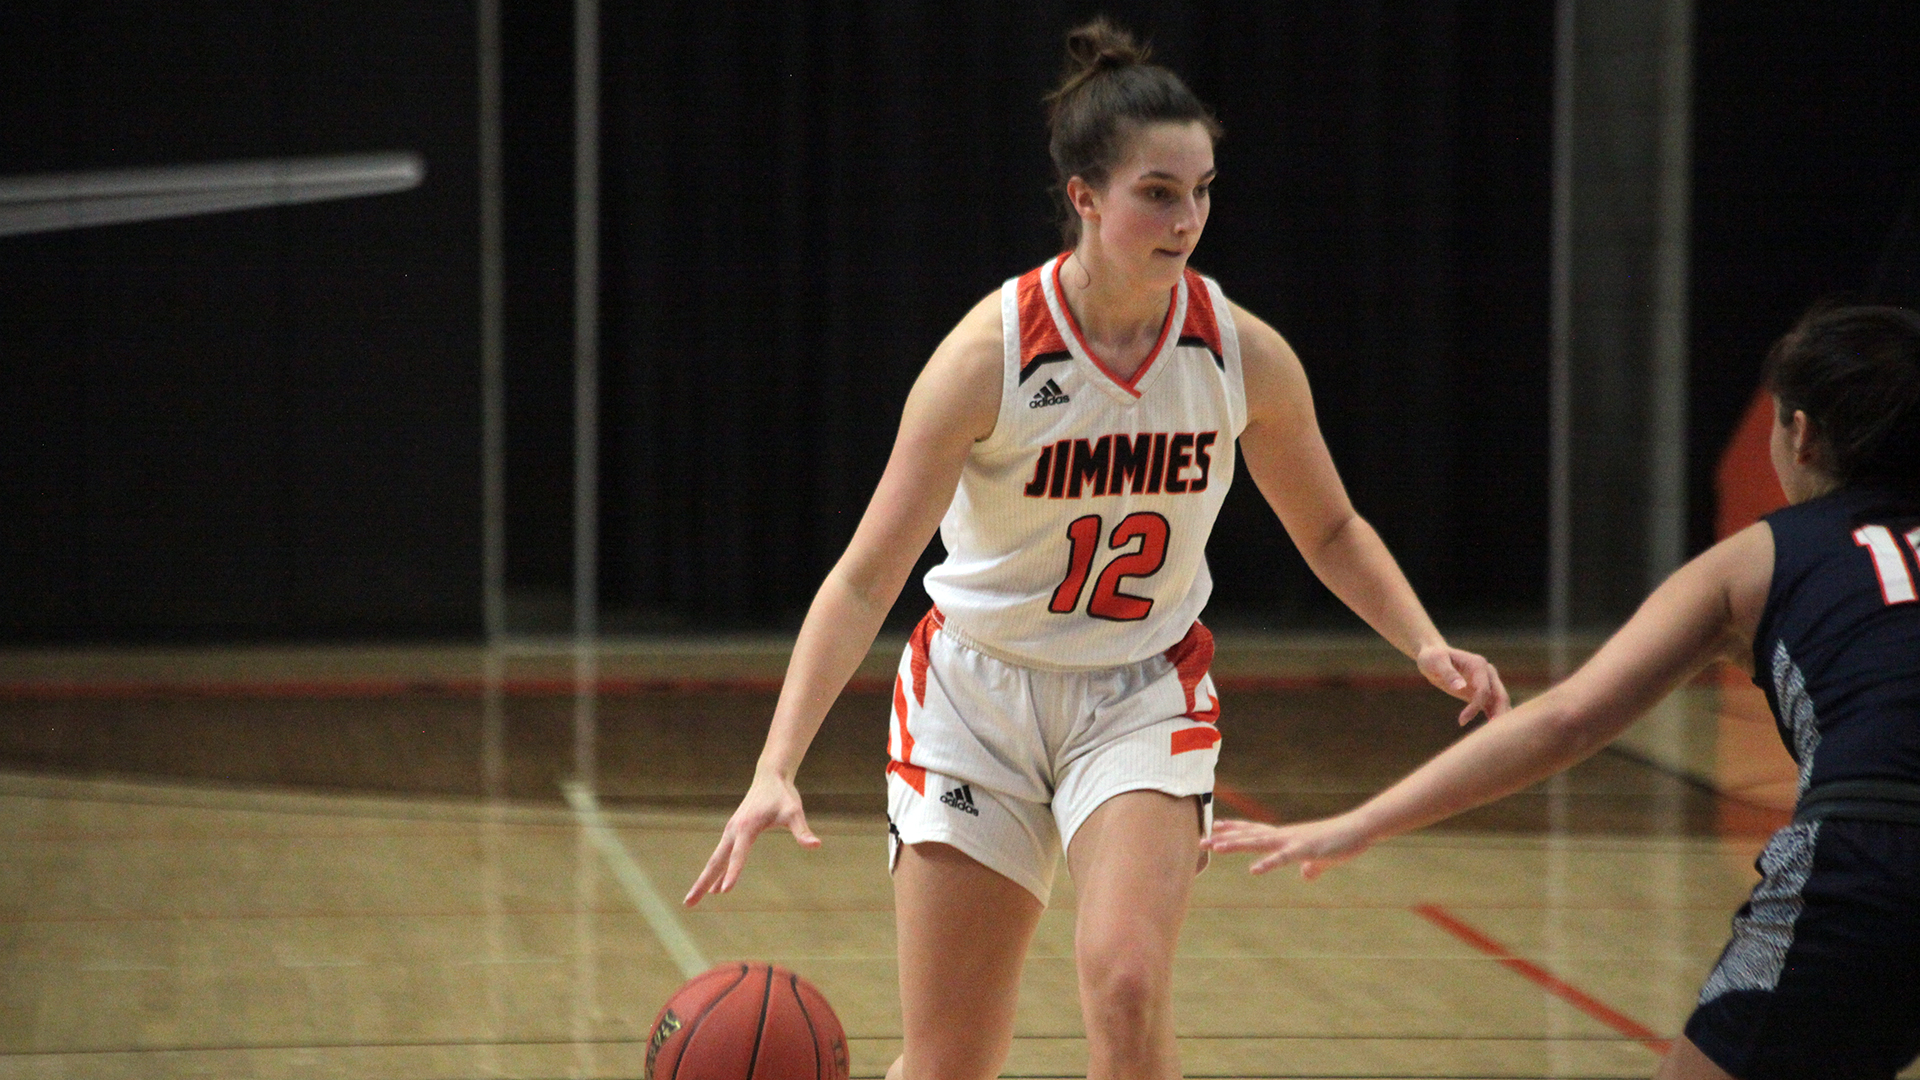 Free throws, turnovers make the difference as Jimmies fall to Briar Cliff